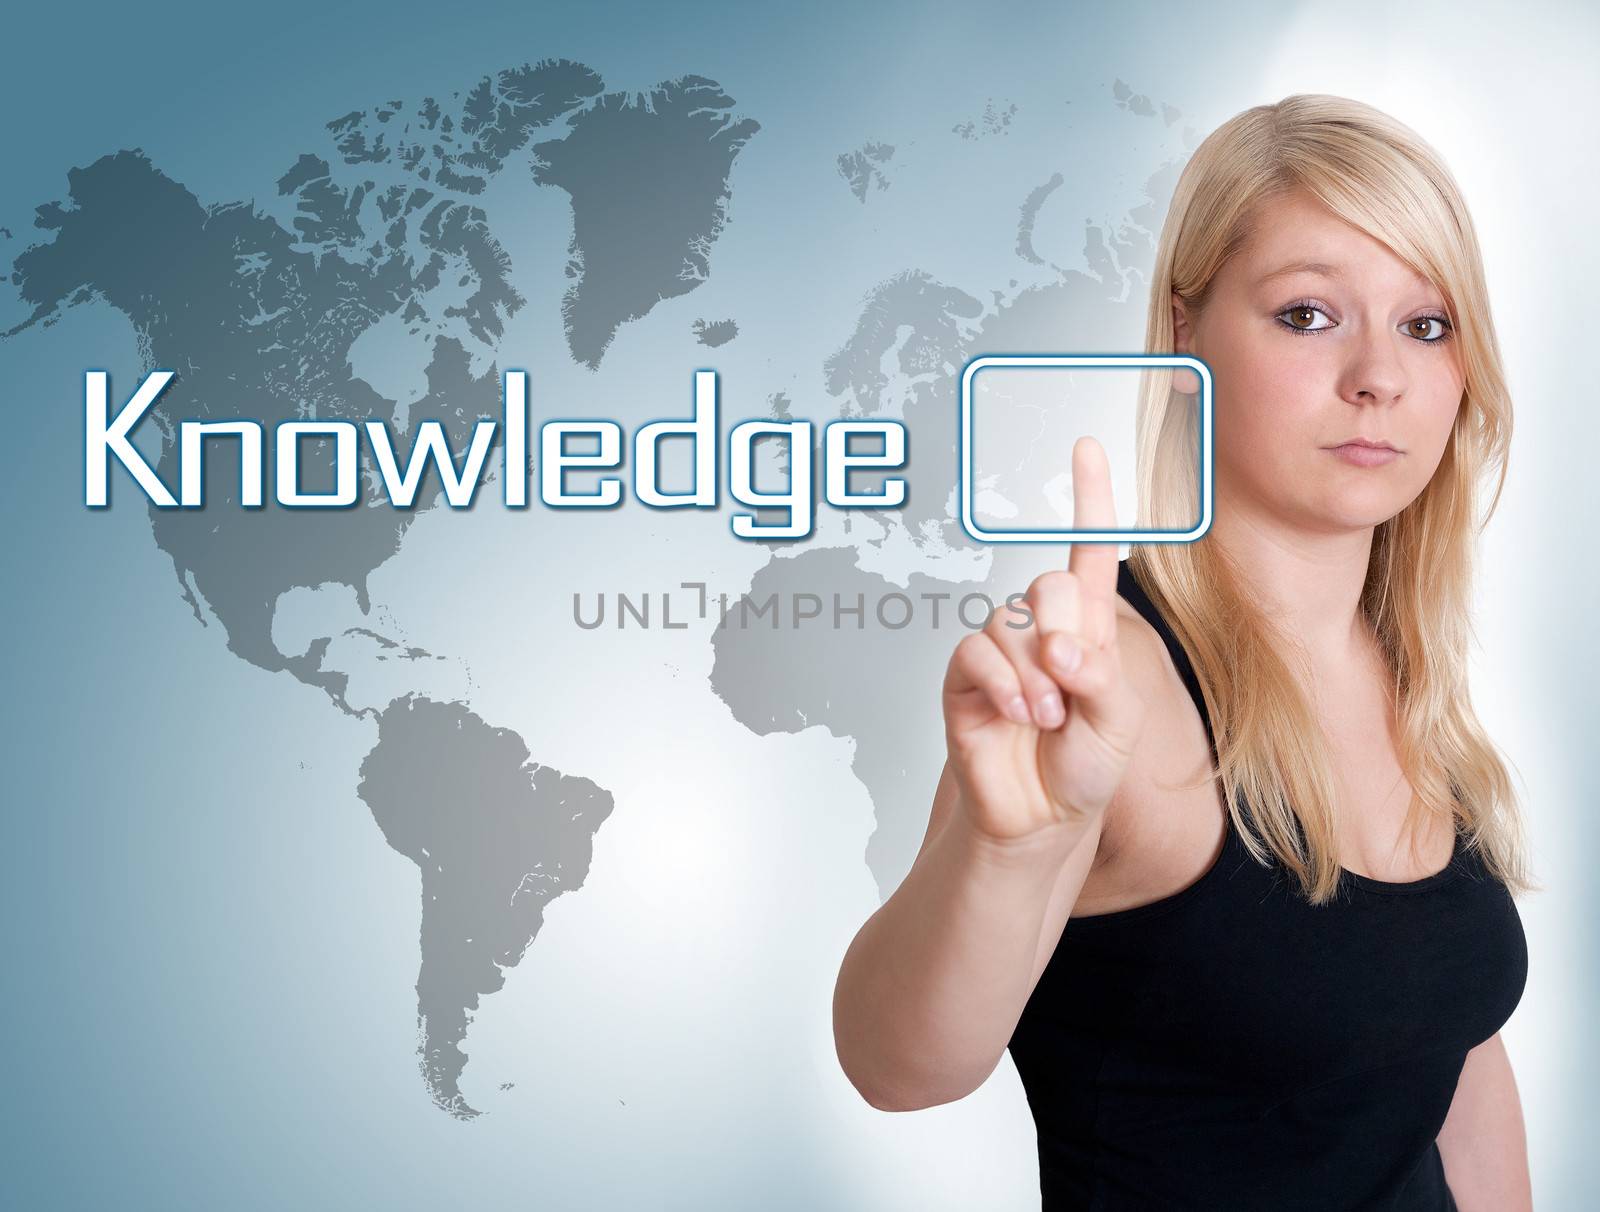 Young woman press digital Knowledge button on interface in front of her